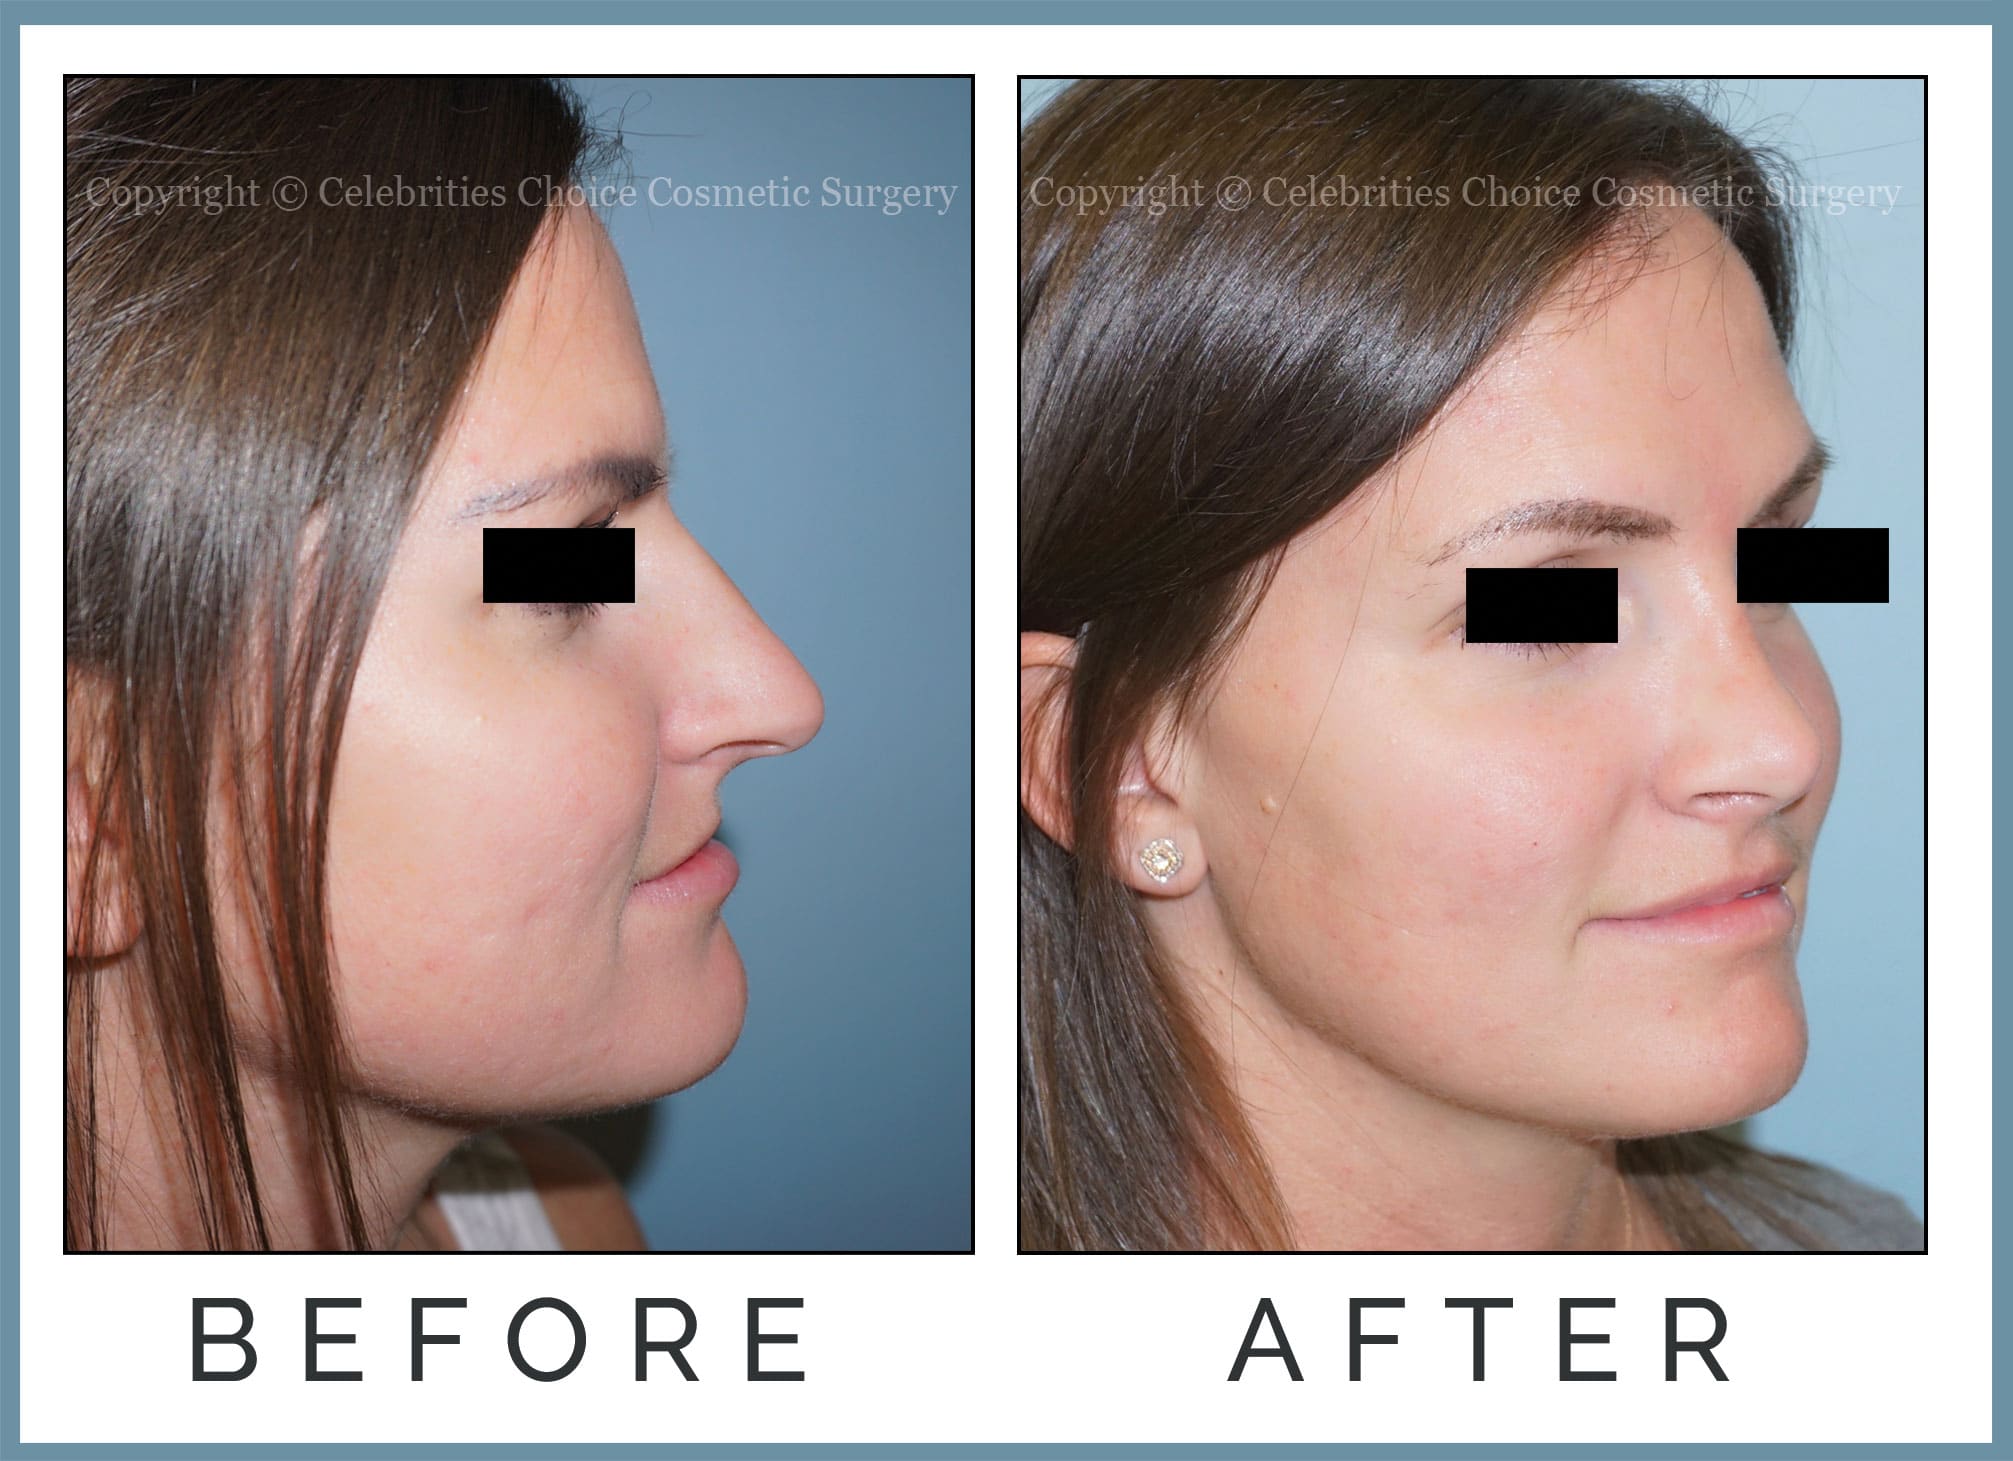 Reduction Rhinoplasty performed through a Closed Technique